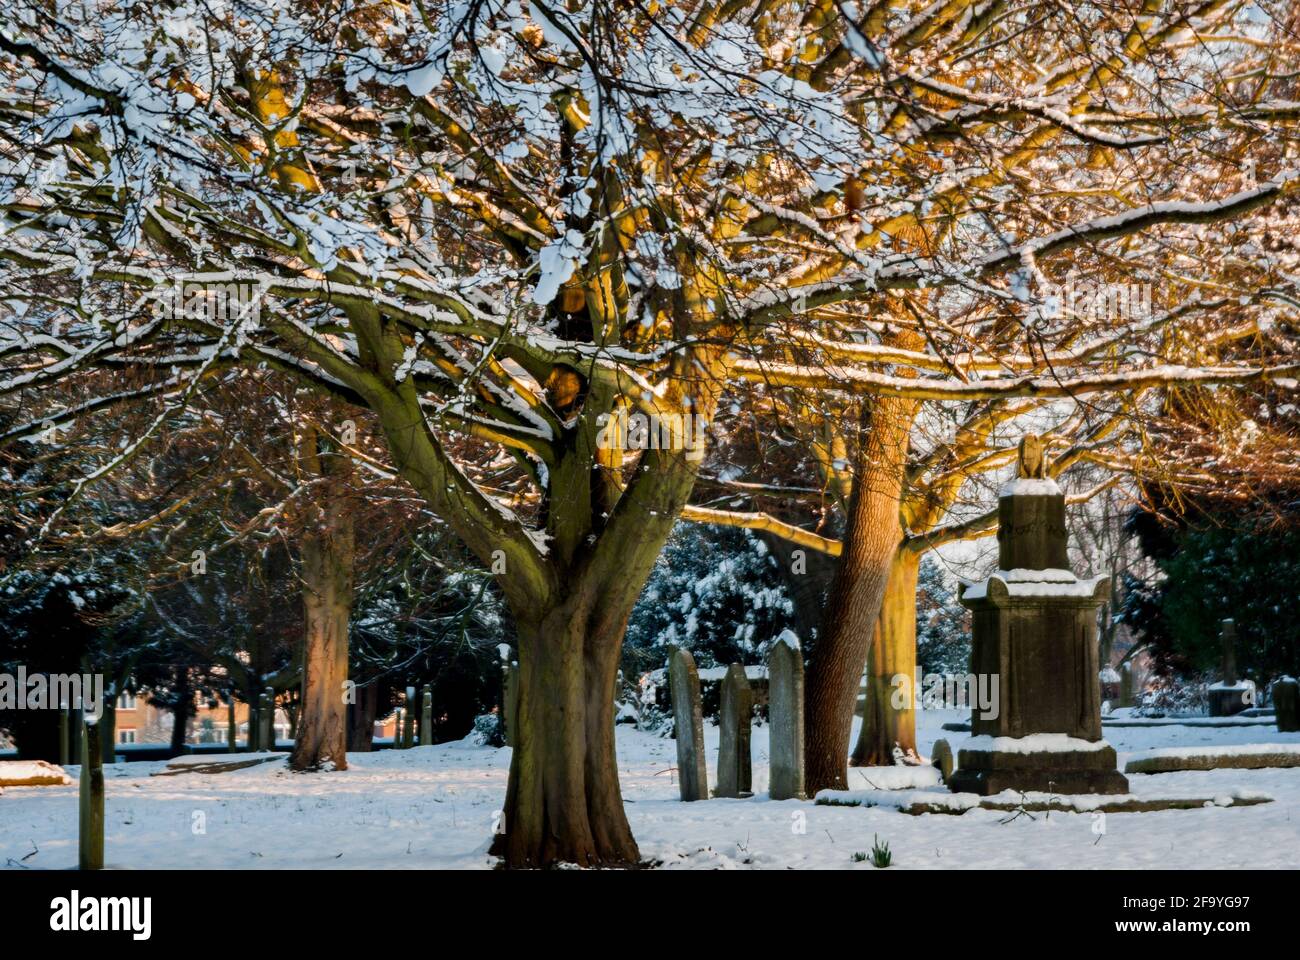 Snow amongst the trees in the churchyard of St Mary's Church, Staines-upon-Thames, UK. Stock Photo